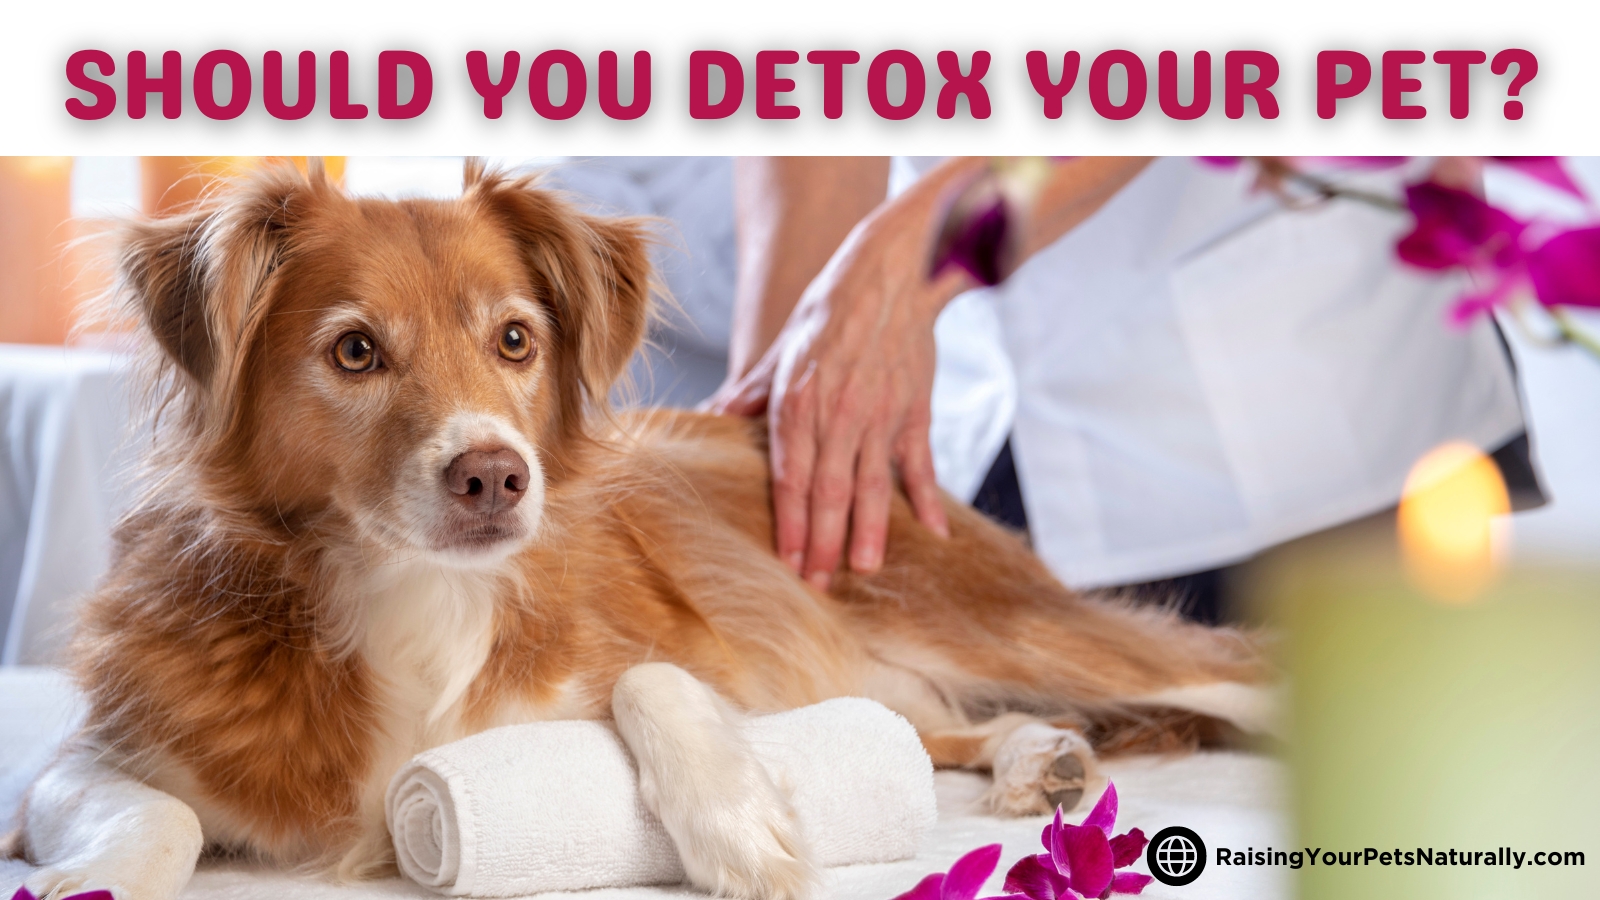 How to detox a dog 